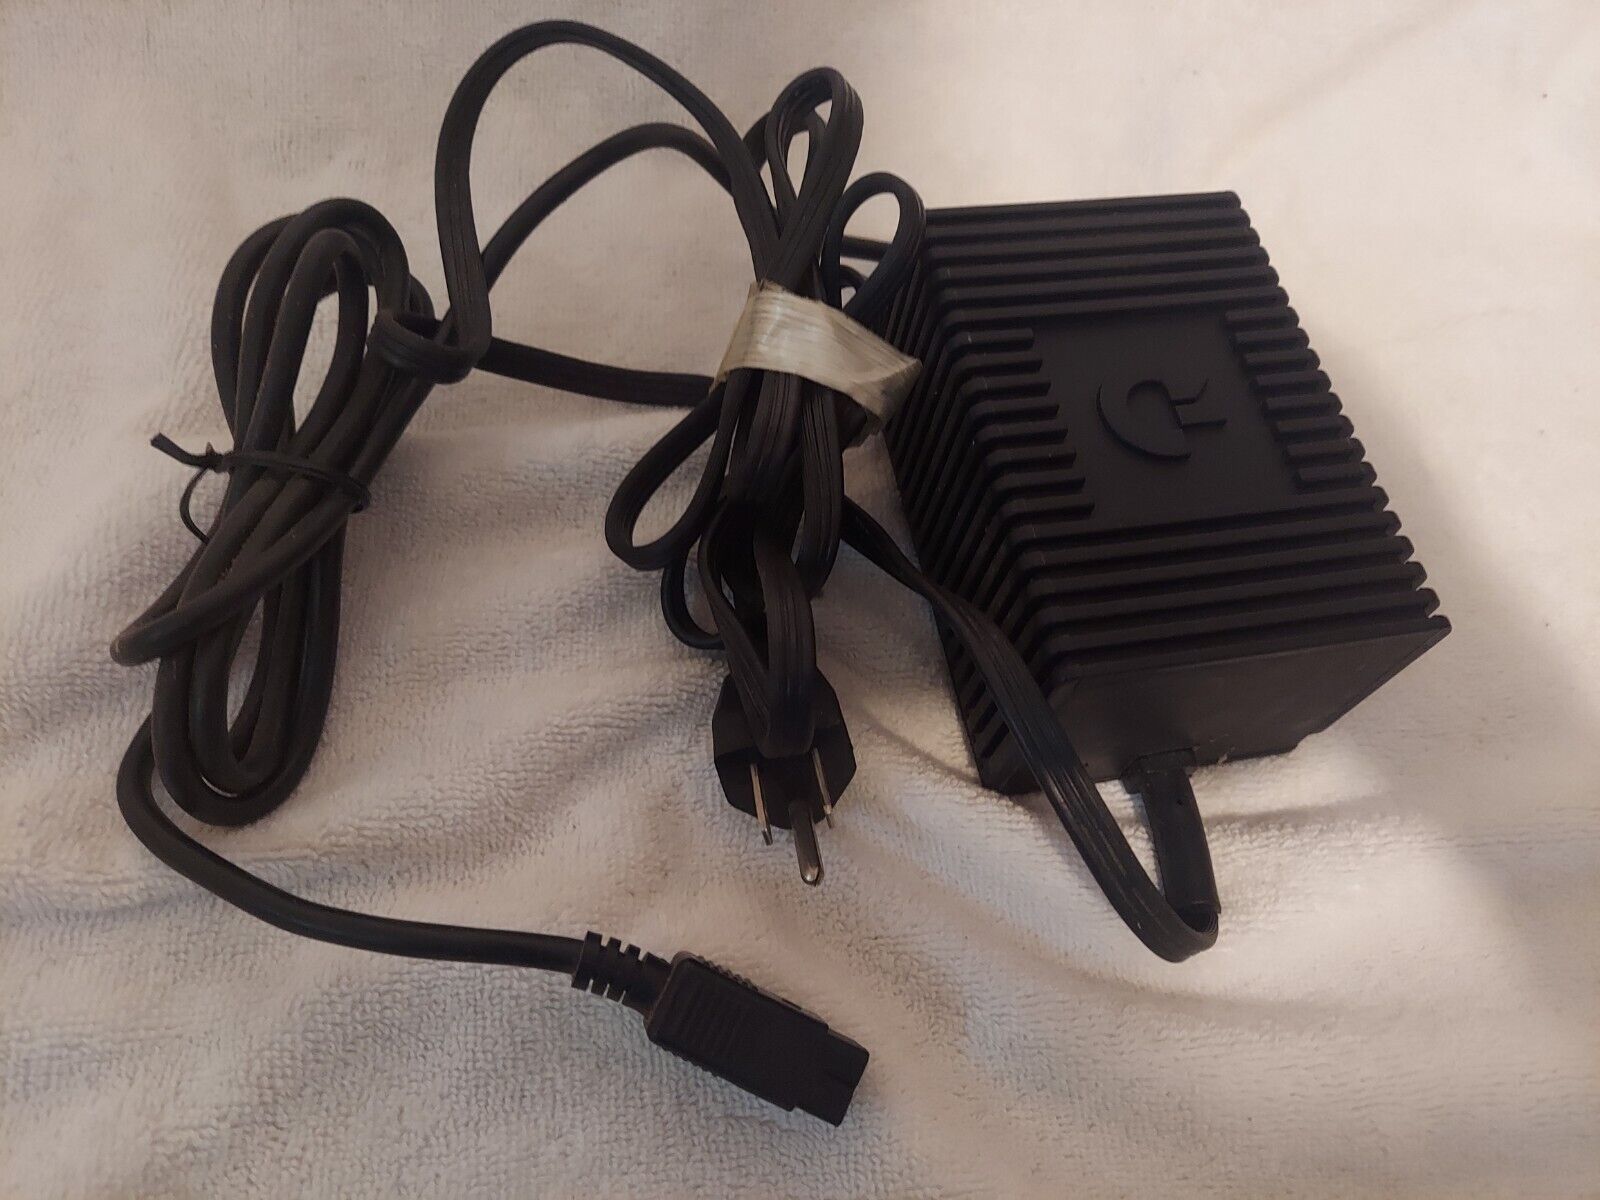 Commodore Computer Original Power Supply with the 4 Pin connection Cord 